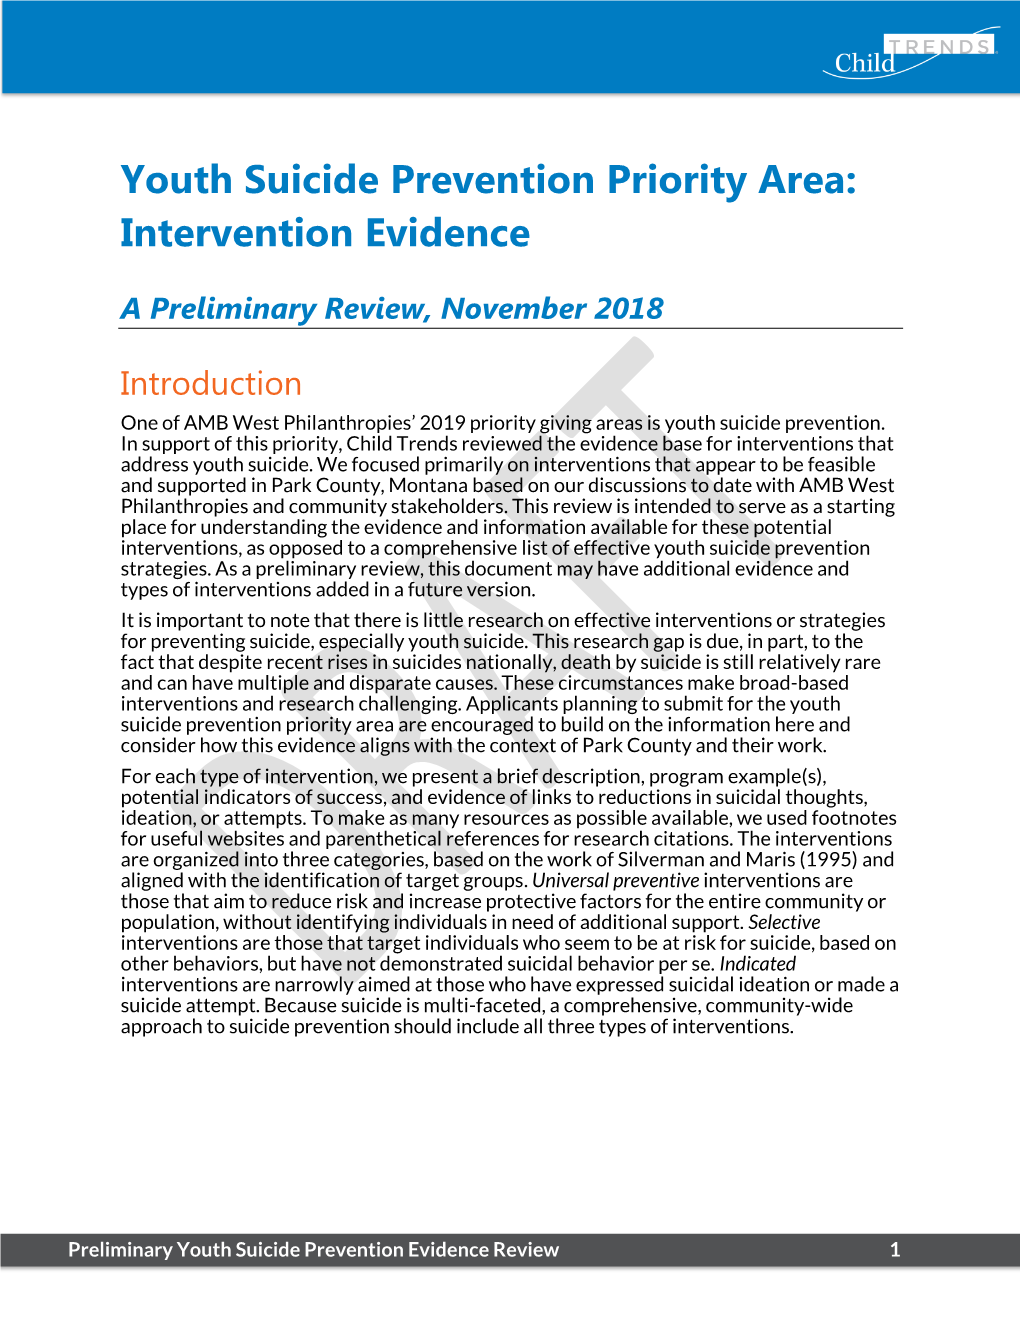 Youth Suicide Prevention Priority Area: Intervention Evidence